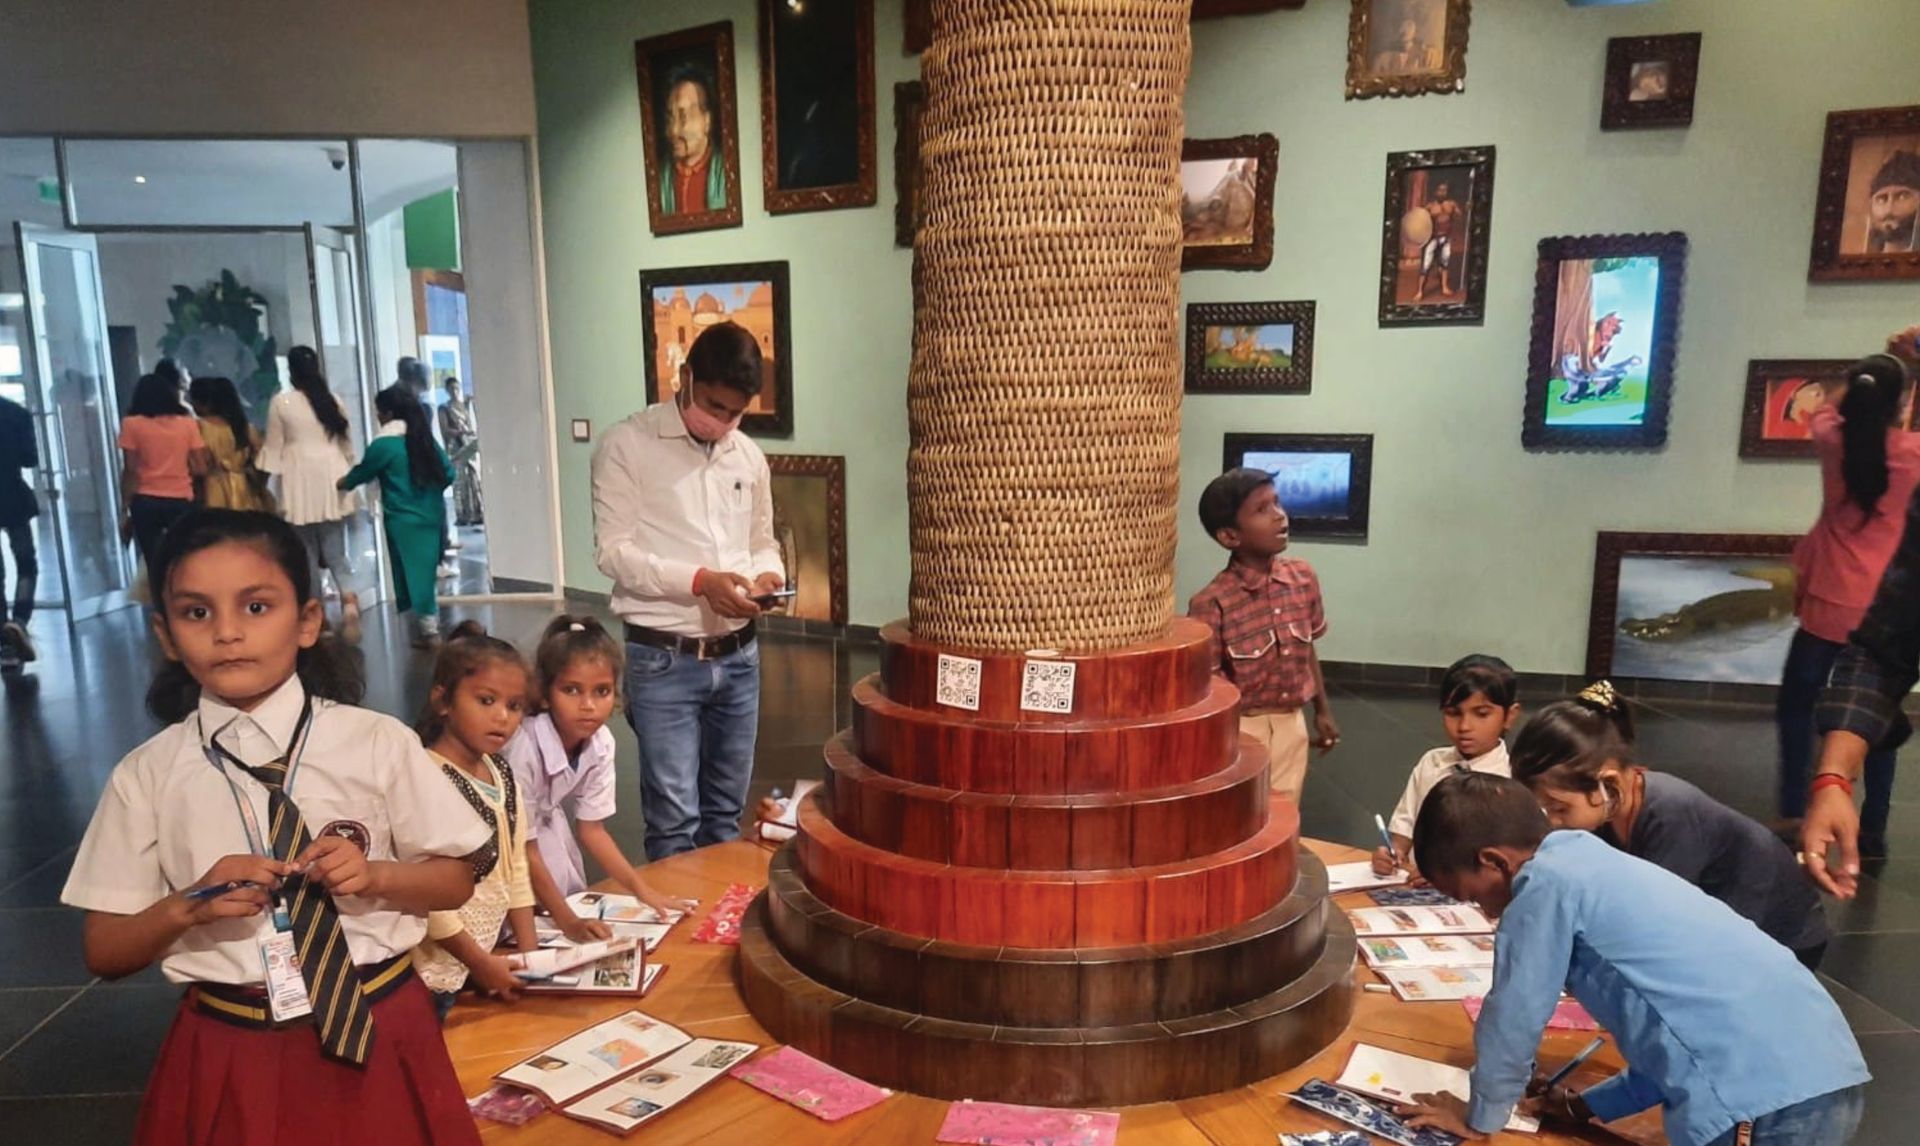 Tens of thousands of schoolchildren have visited the Bihar Museum in Patna, India, thanks to a government scheme Courtesy of Bihar Museum